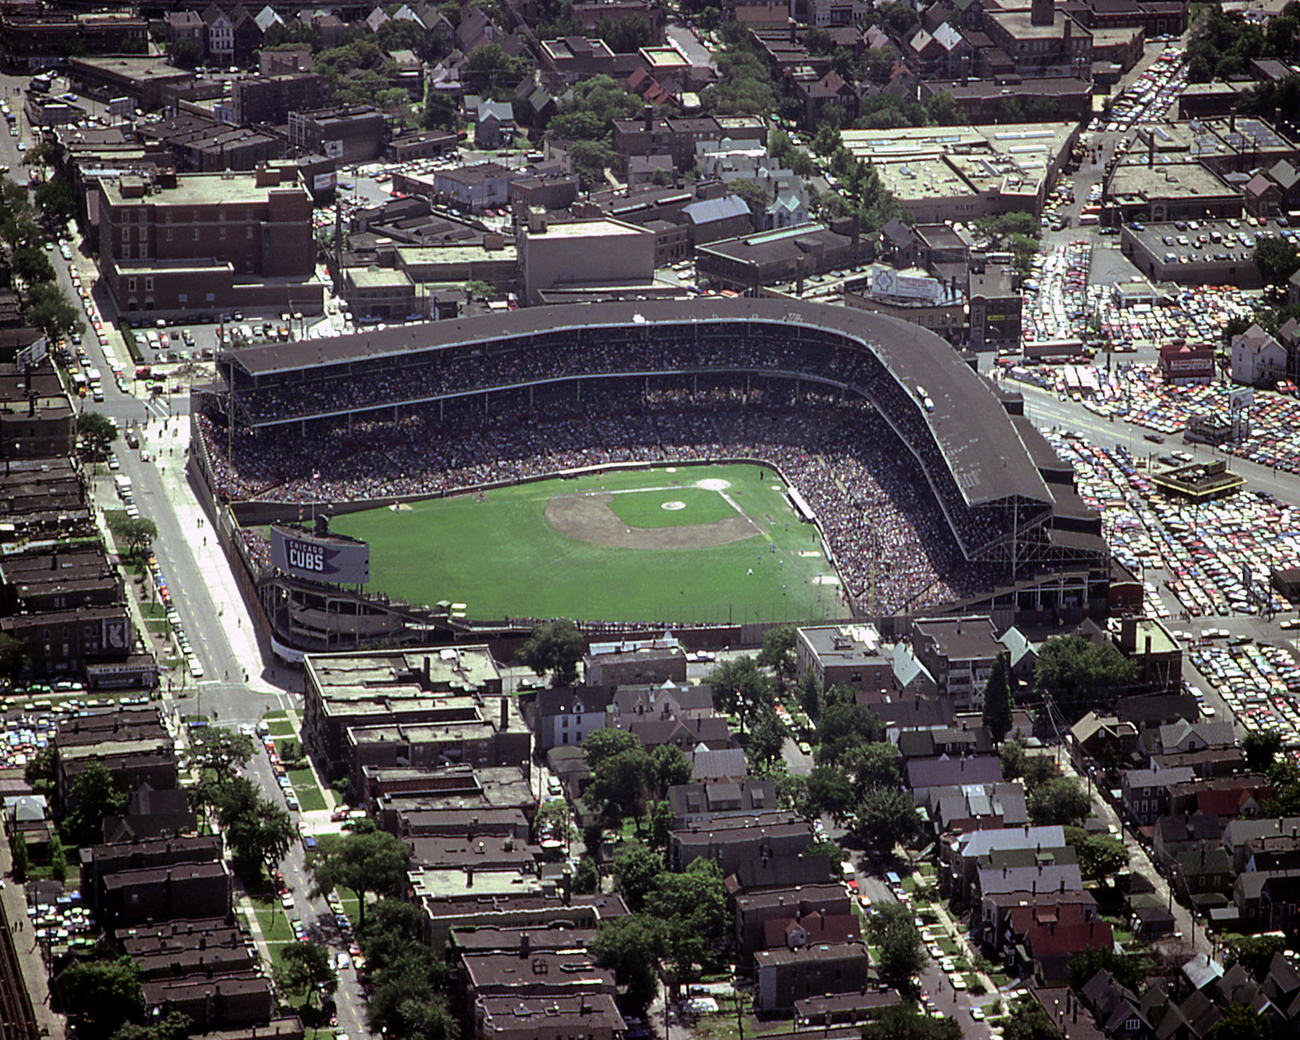 Free Wallpaper Wrigley Field Aerial In The 1980s - Wrigley Field In The 1980s - HD Wallpaper 